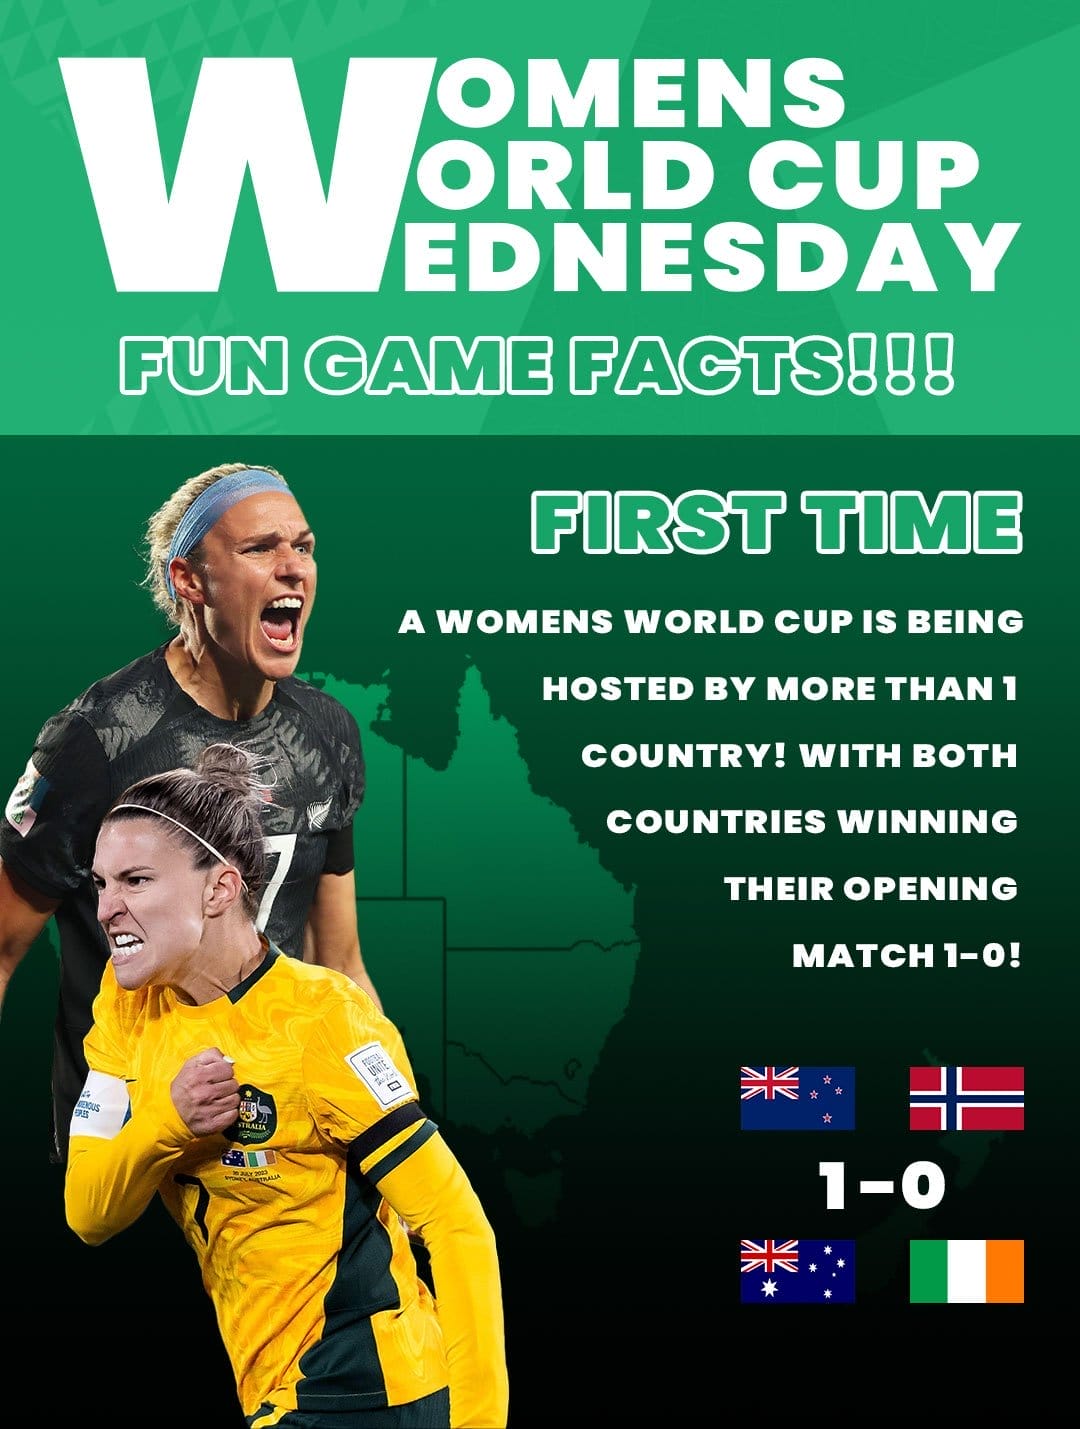 WOMEN'S WORLD CUP WEDNESDAY FUN GAME FACTS!!! FIRST TIME A WOMENS WORLD CUP IS BEING HOSTED BY MORE THAN 1 COUNTRY! WITH BOTH COUNTRIES WINNING THEIR OPENING MATCH 1-0!